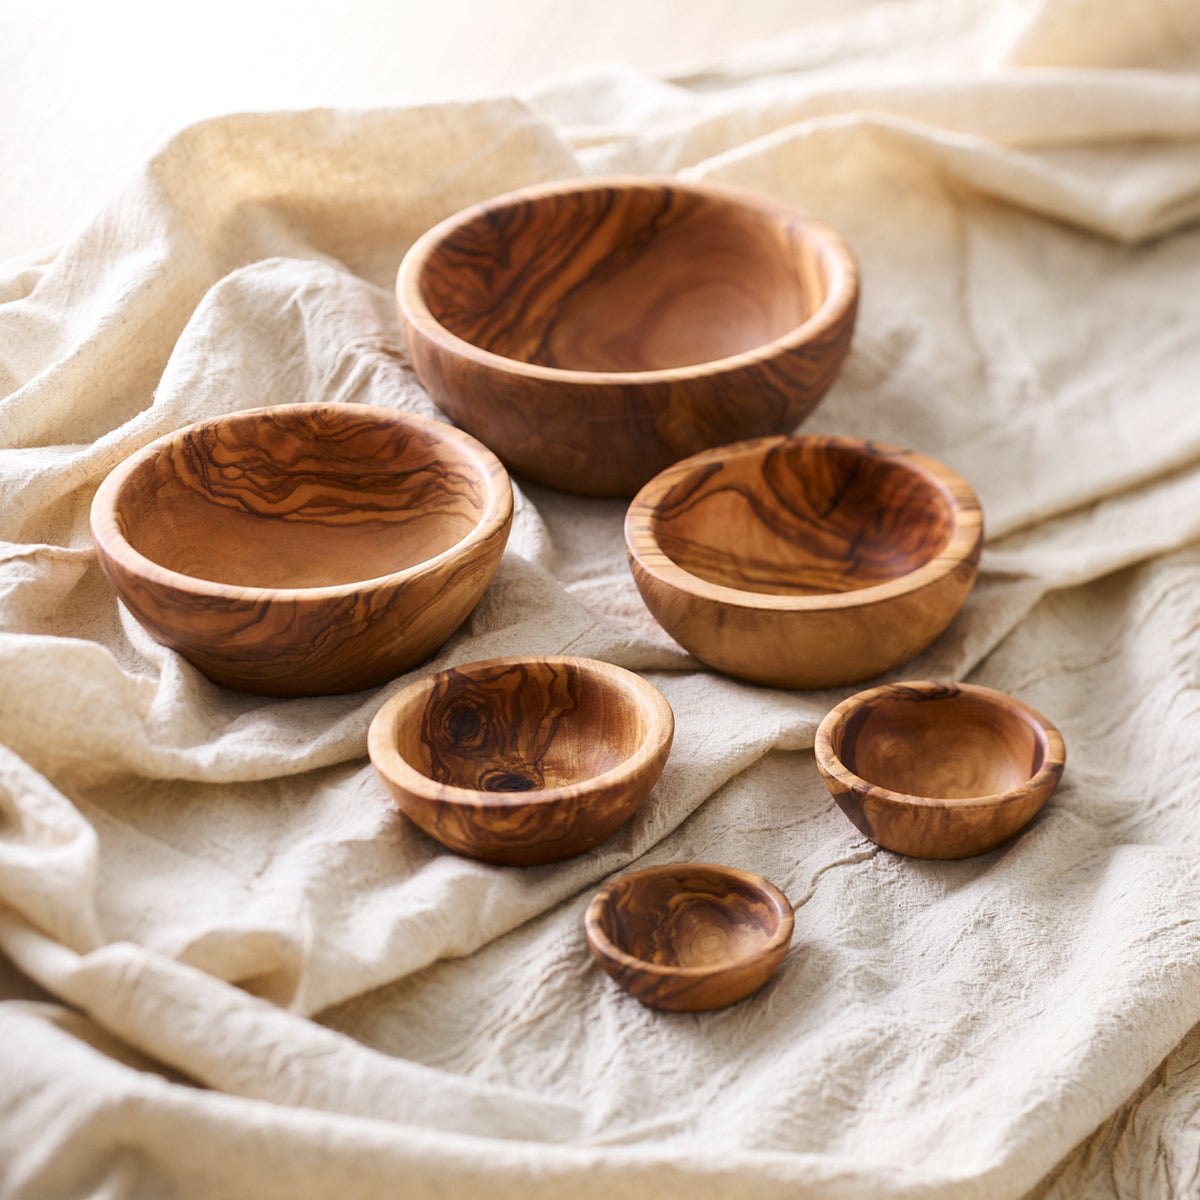 A set of Be Home Olive Wood Nesting Bowls, Set of 6 on a white cloth.